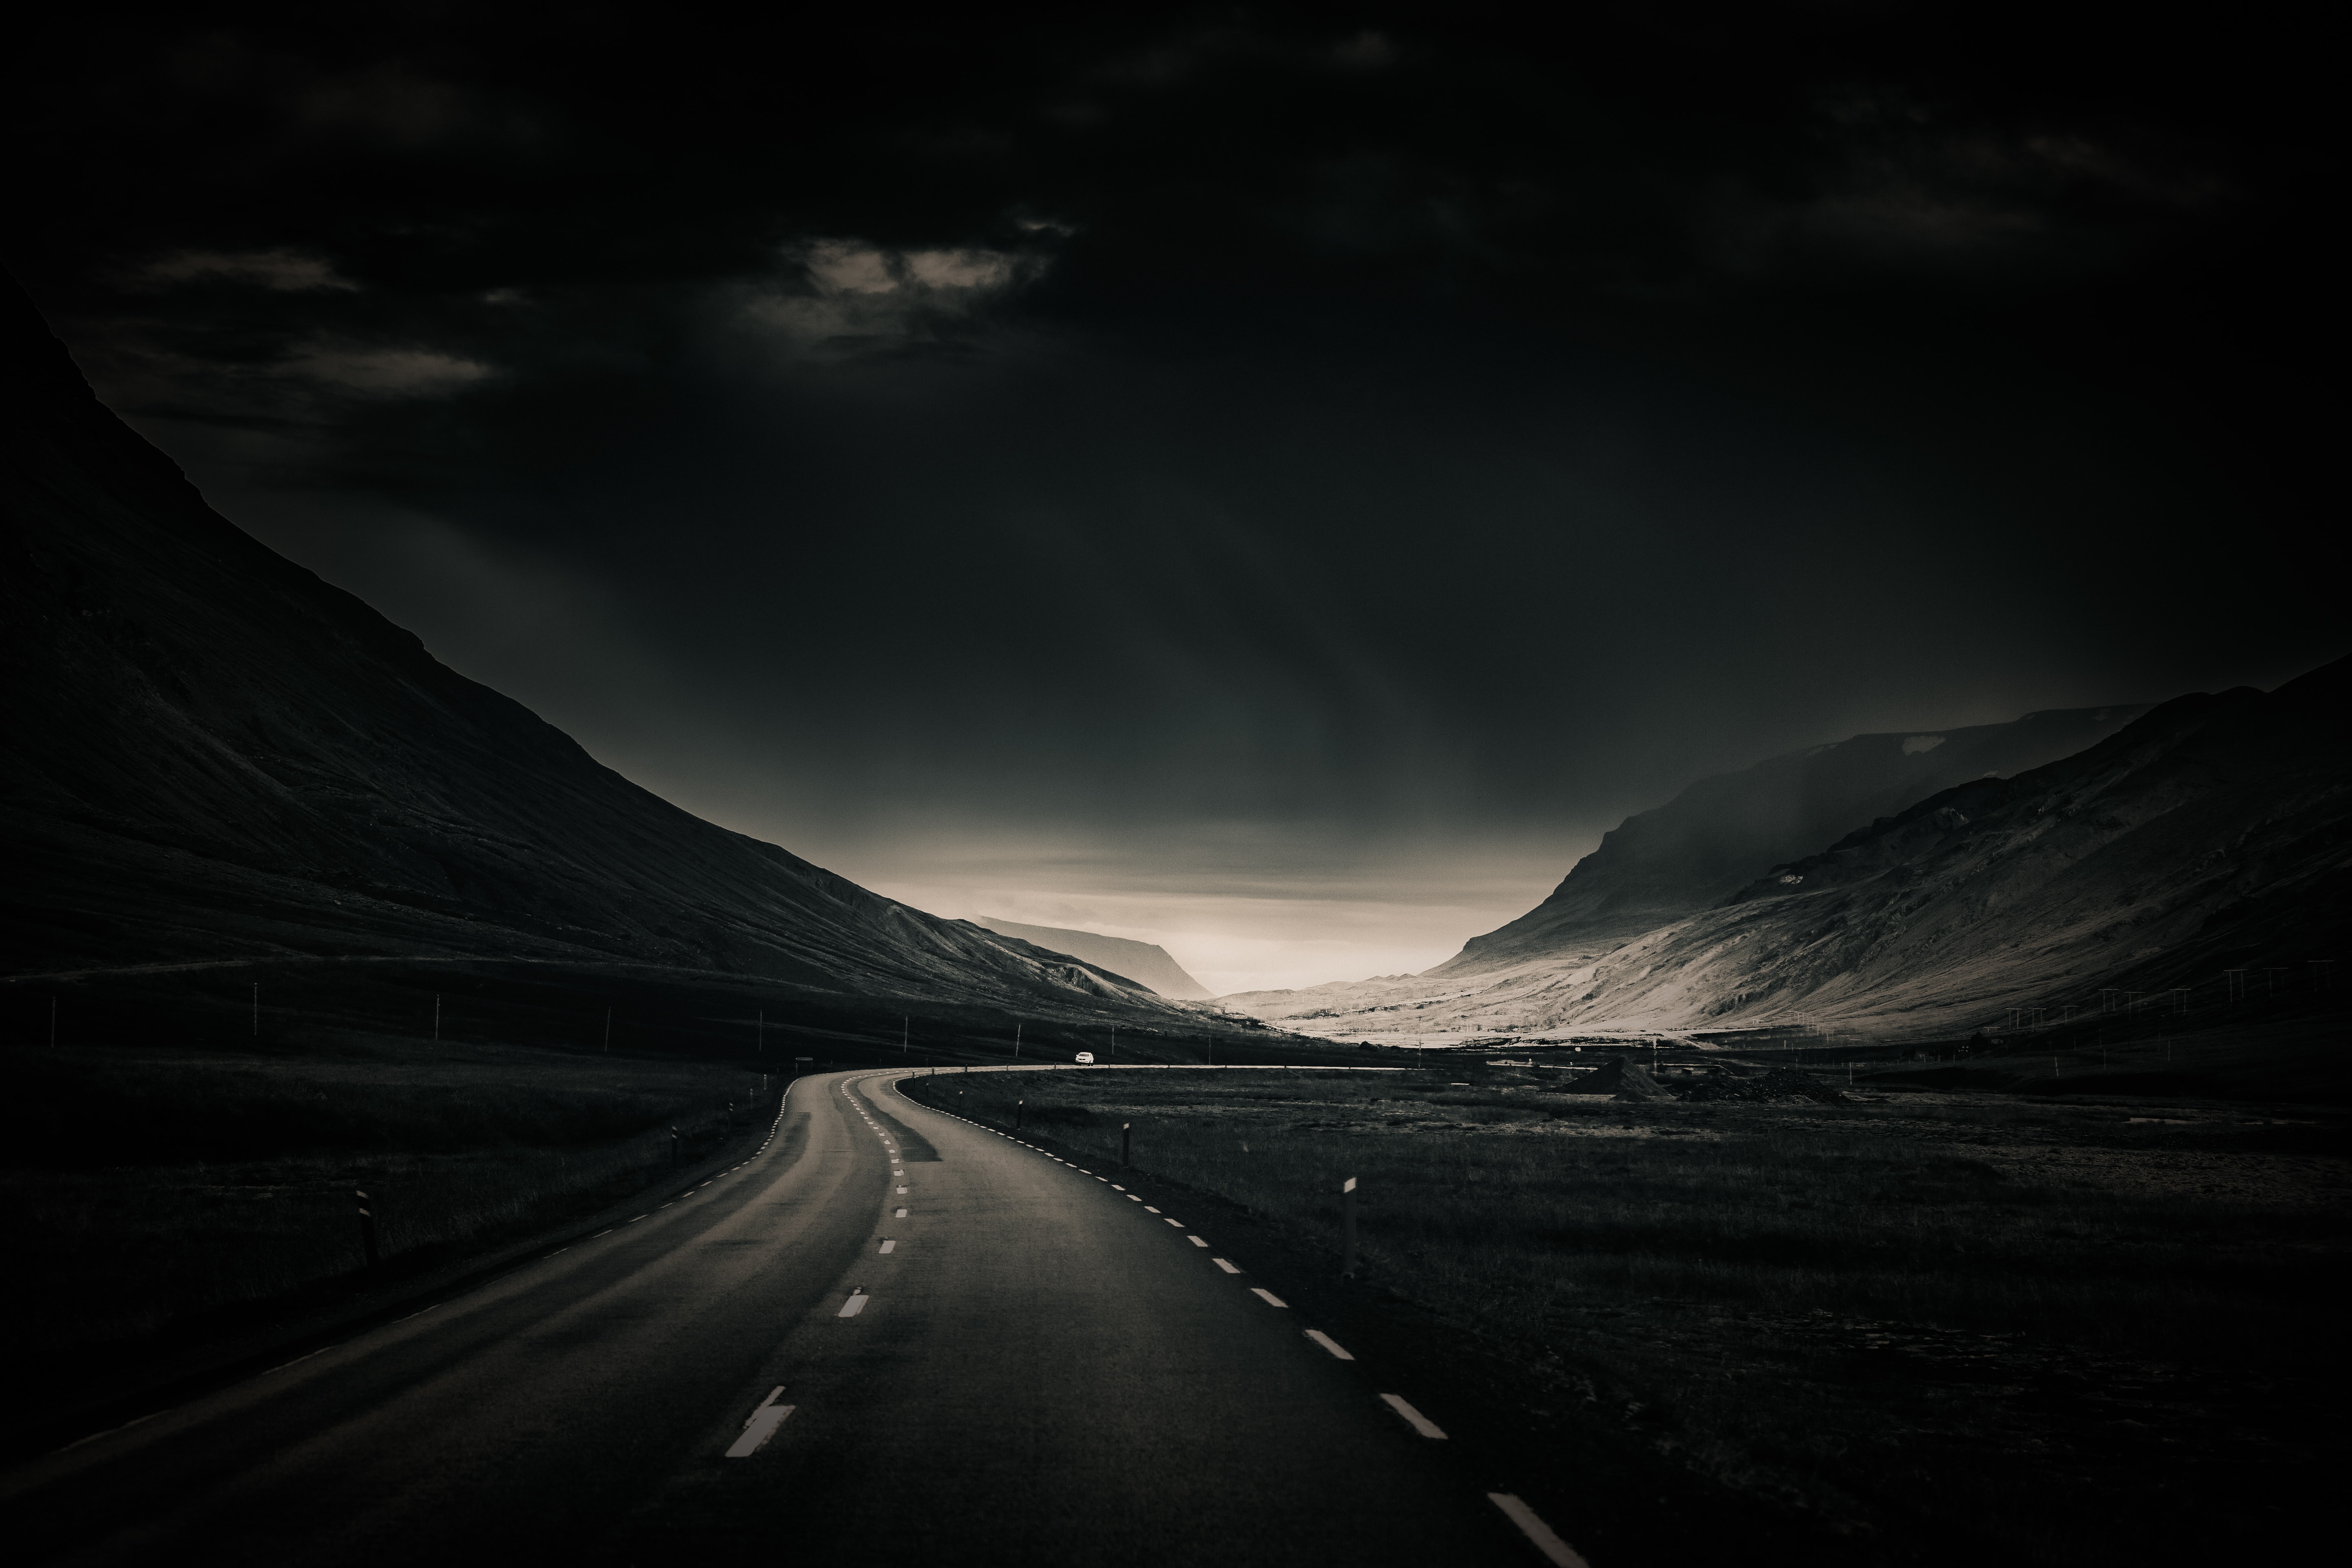 nature, road, bw, chb, dahl, distance, winding, sinuous